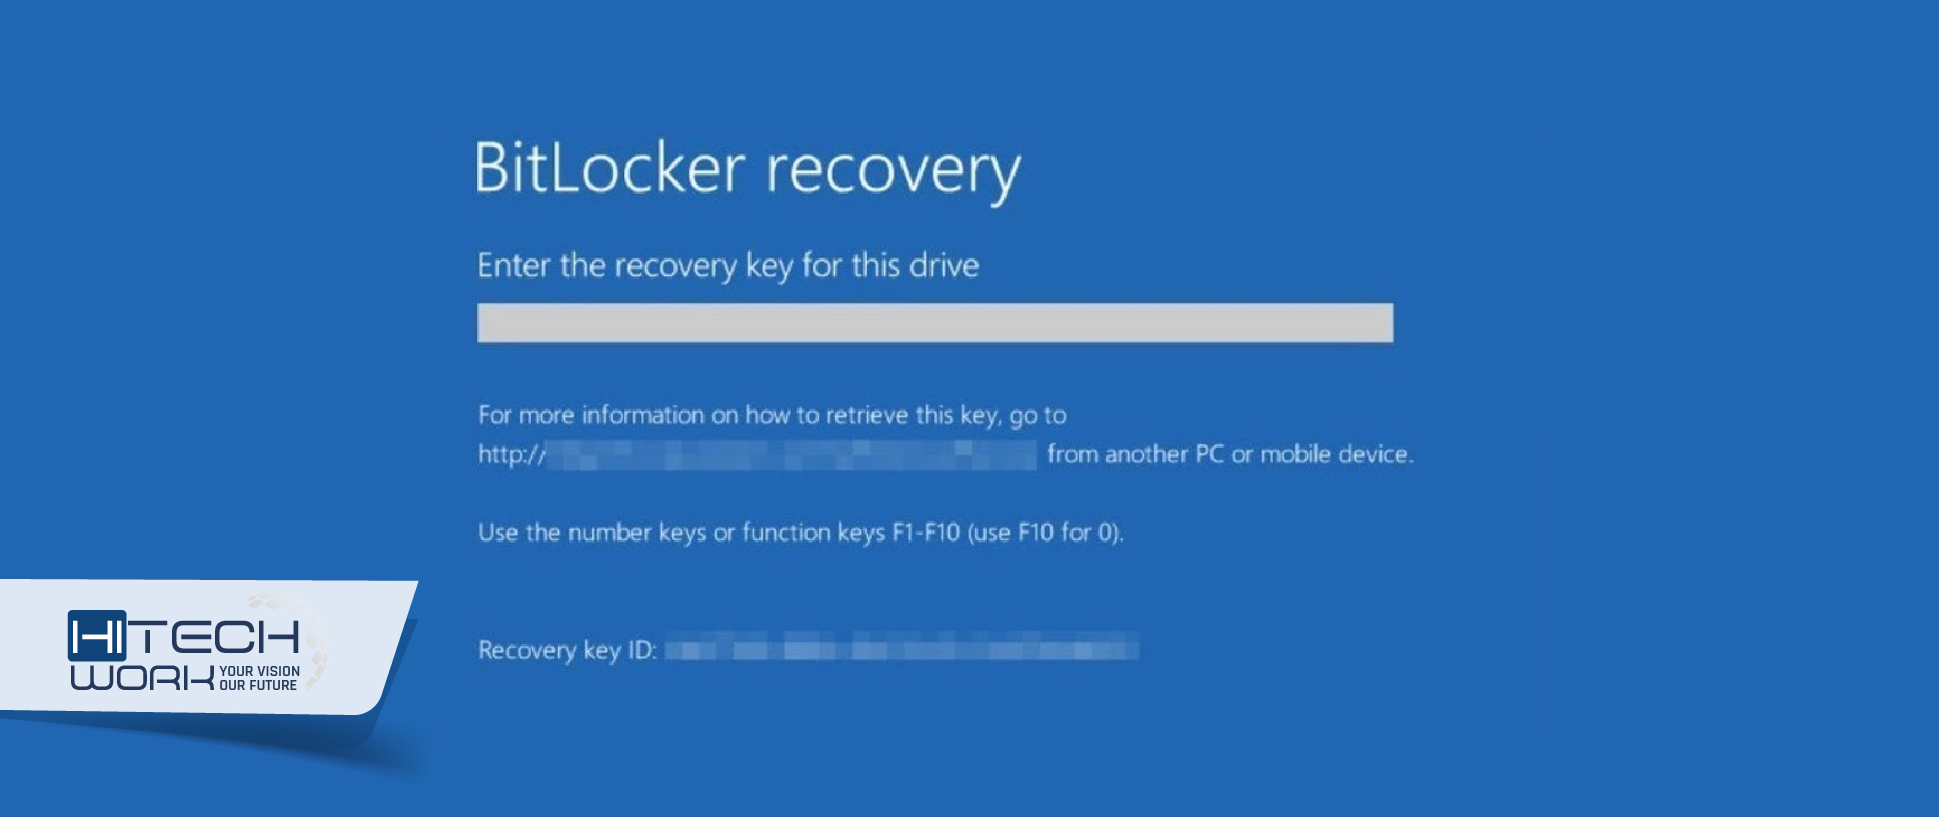 How to Get BitLocker Recovery Key With Key ID